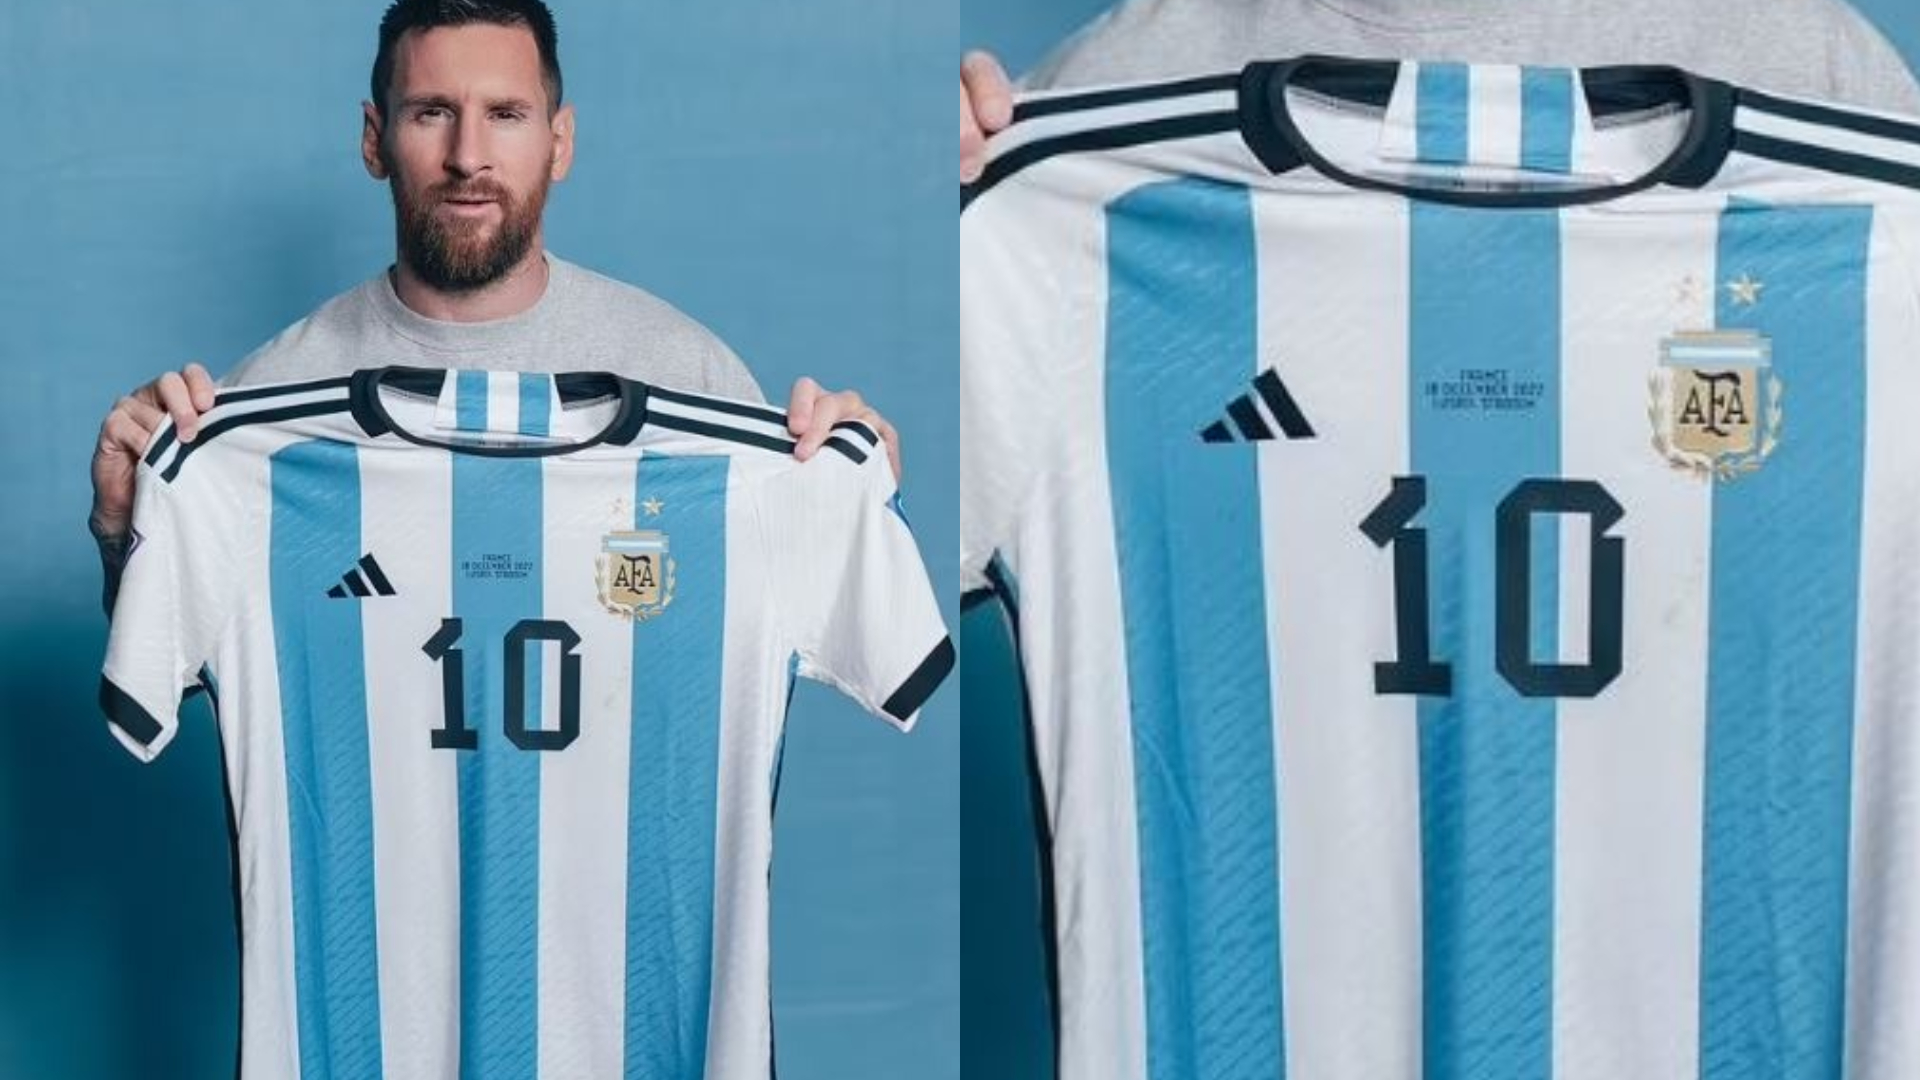 Lionel Messi's World Cup match jerseys and the outfit he wore in the famous final versus France are due to go up for sale.